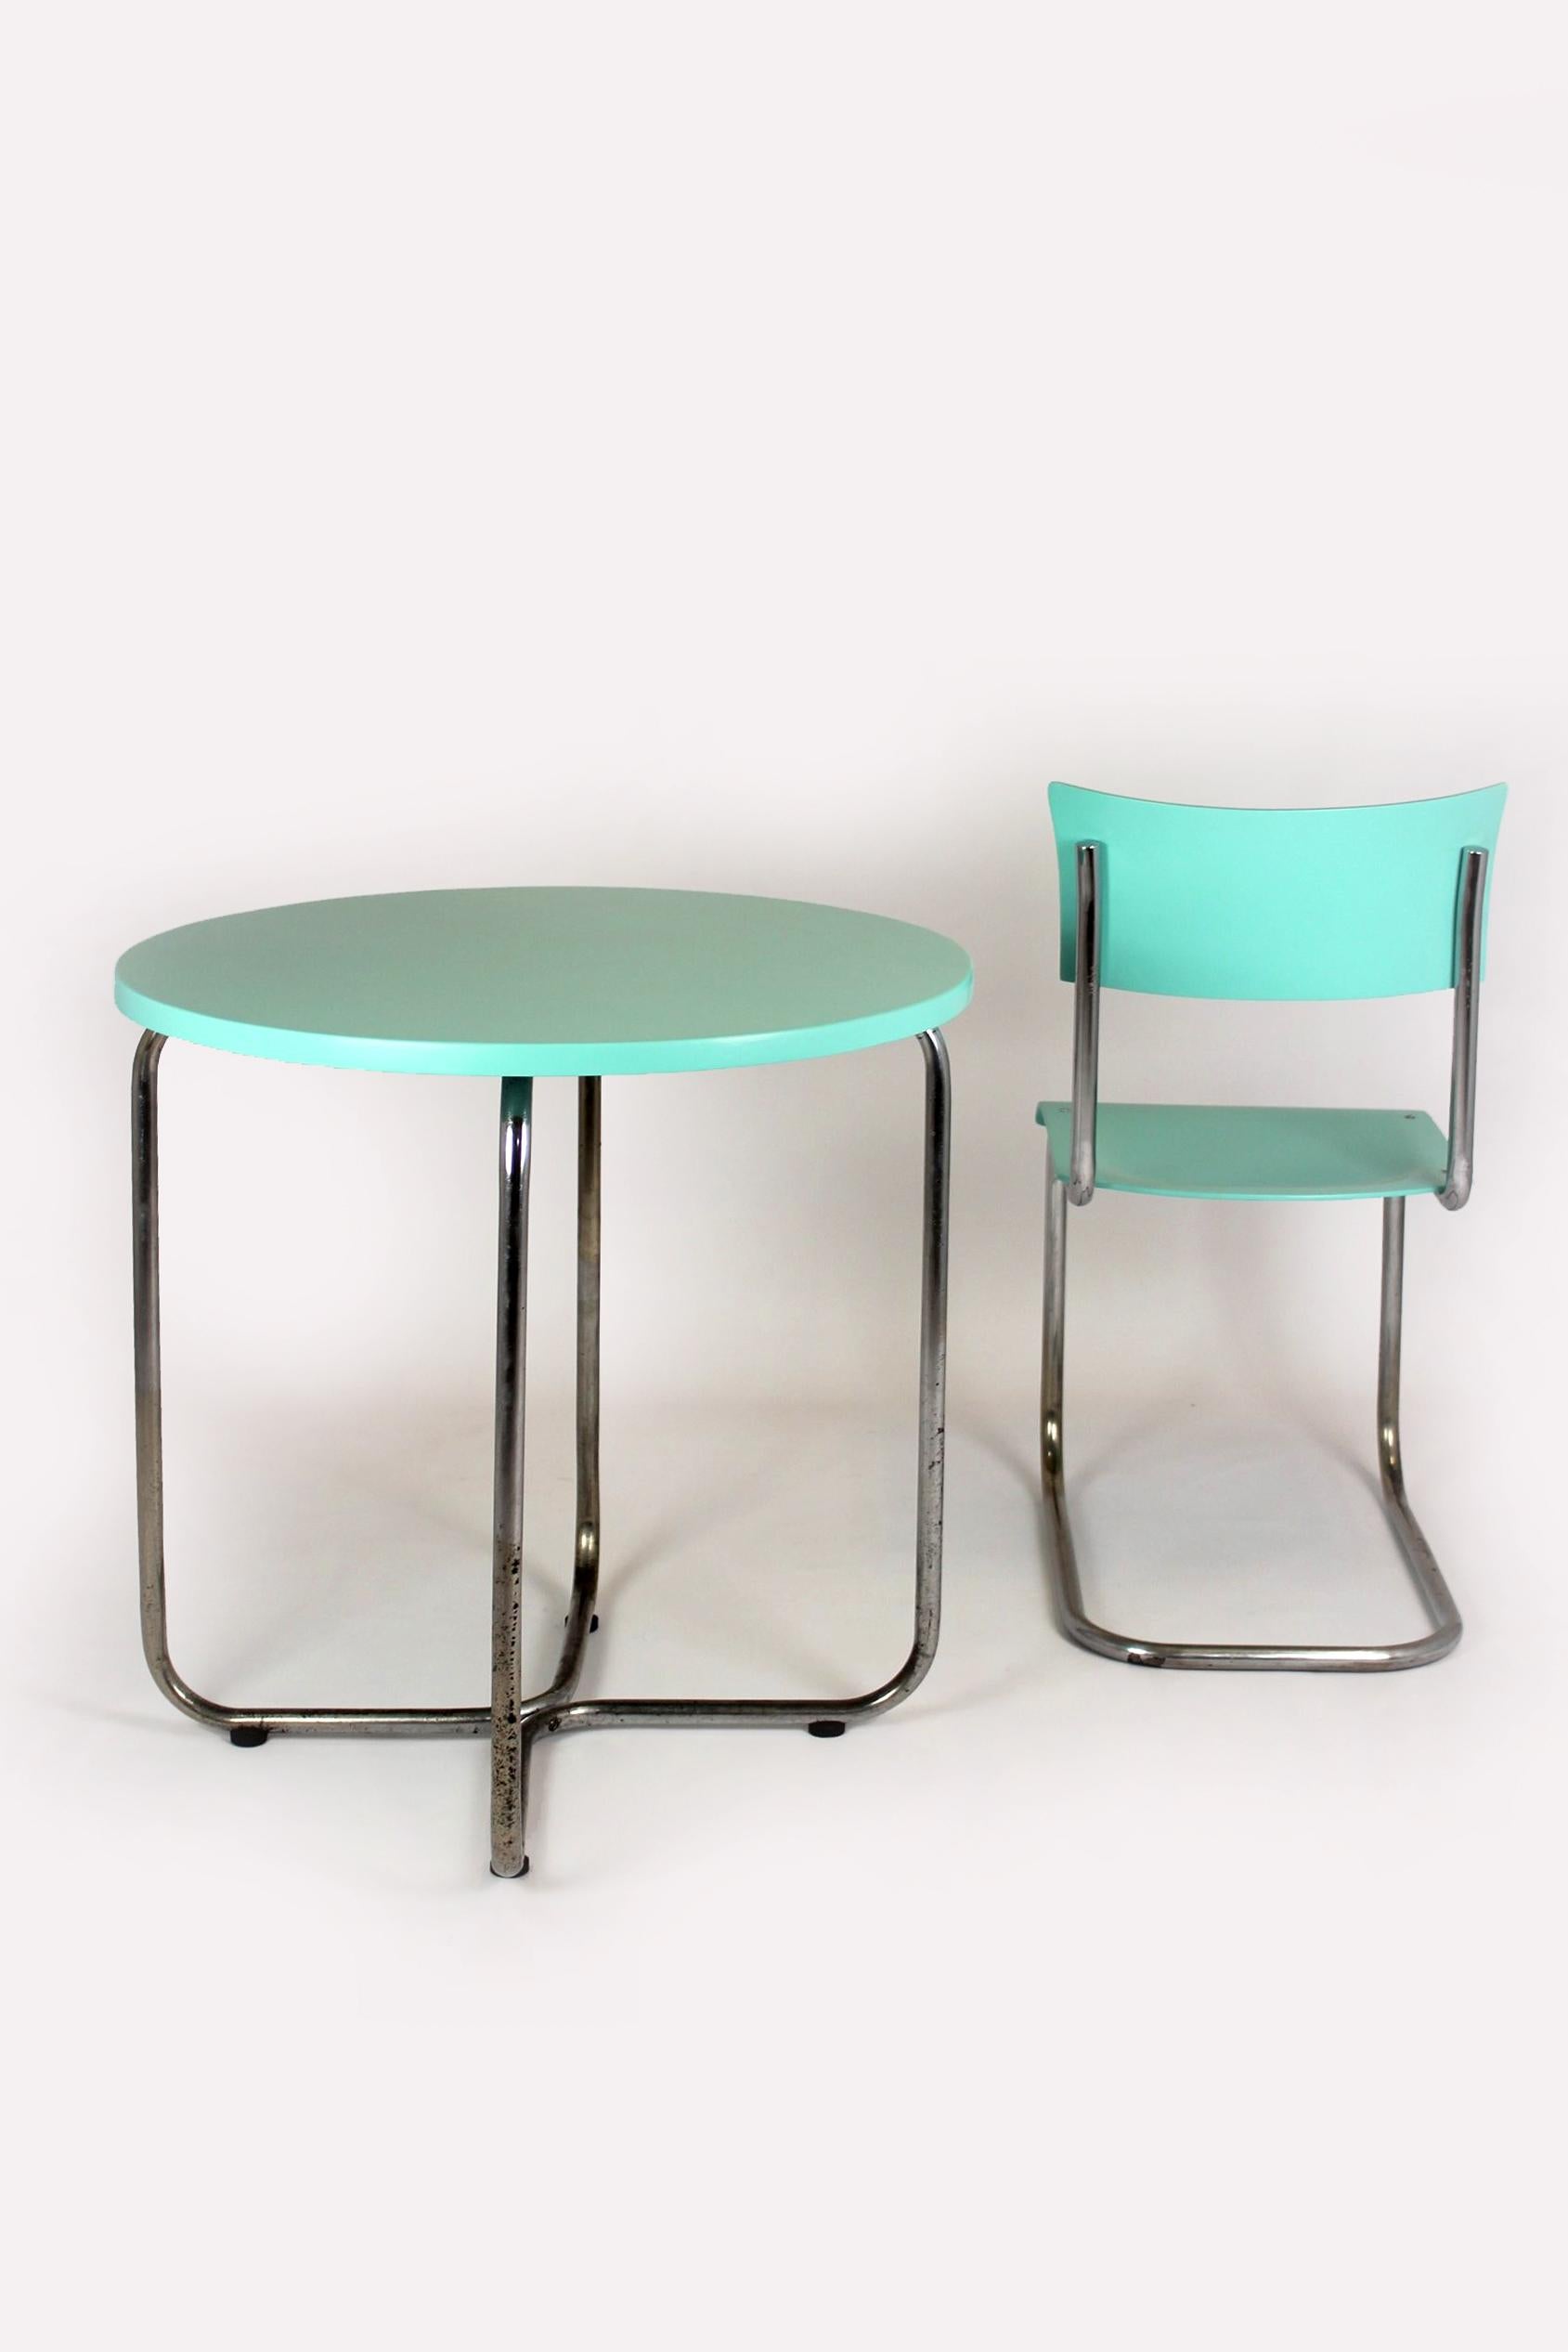 Bauhaus Tubular Steel Set, Round Table and Chair by Mart Stam, 1930s For Sale 15